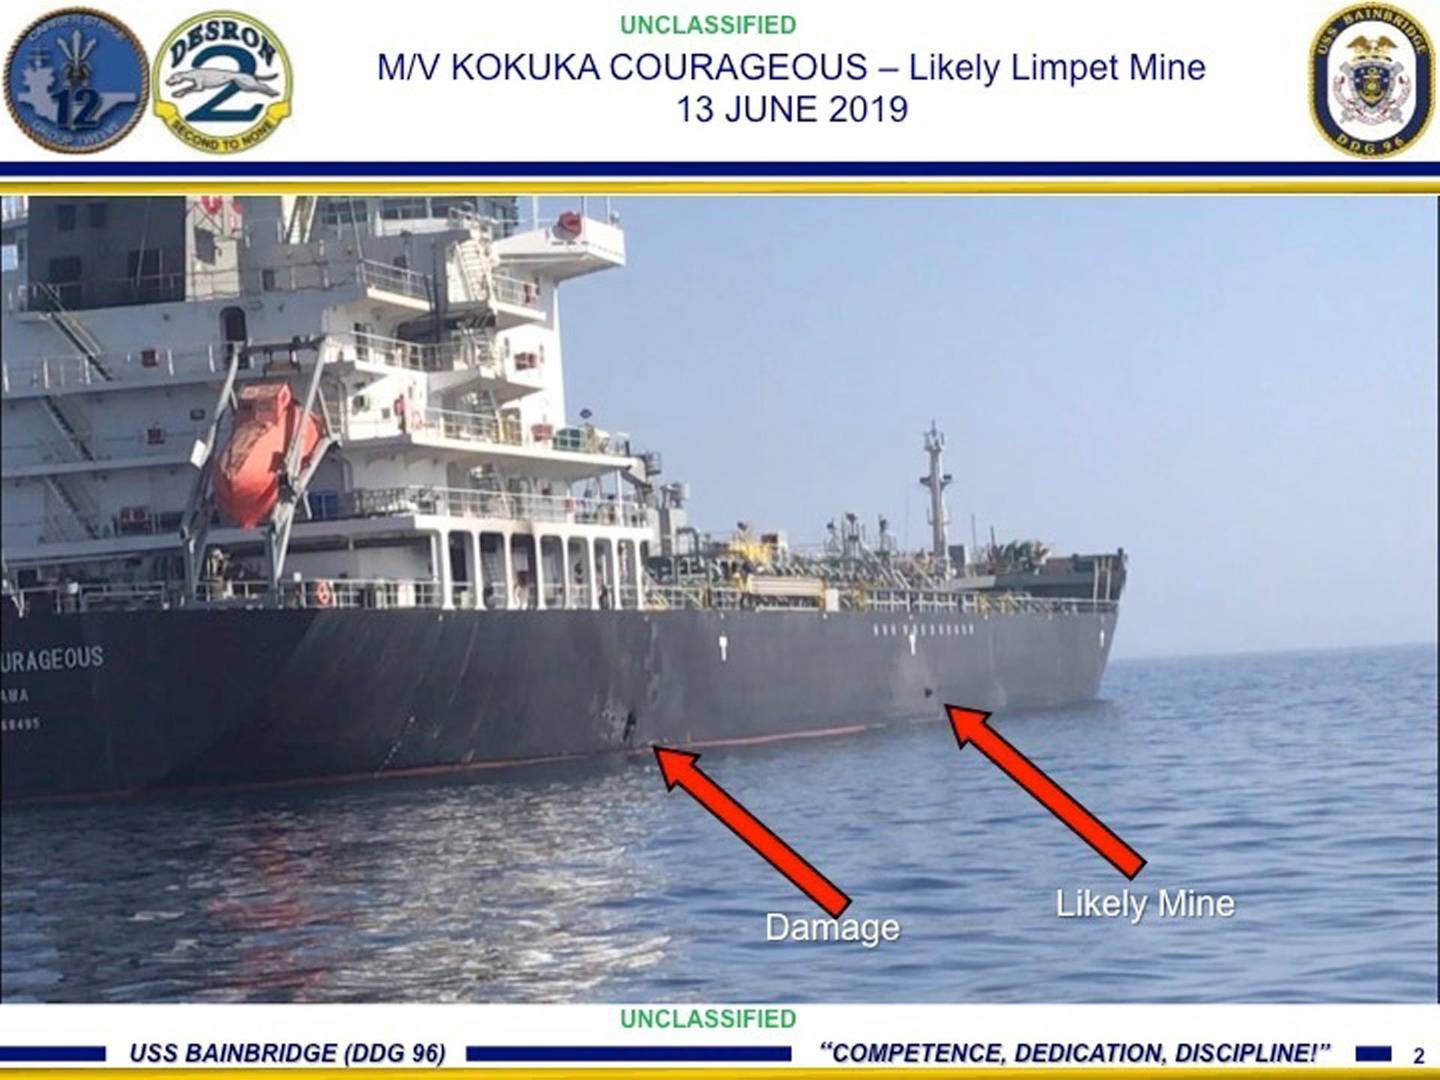 epa07647113 A handout powerpoint slide made available on 14 June 2019 by US Central Command shows damage from an explosion (L) and an object claimed by the US military to likely be a limpet mine on the hull of the civilian vessel M/V Kokuka Courageous in the Gulf of Oman, 13 June 2019, as the guided-missile destroyer USS Bainbridge (DDG 96) (not pictured) approaches the damaged ship. According to media reports, two oil tankers, Japan's Kokuka Courageous and Norway's Front Altair, were damaged in the Gulf of Oman after allegedly being attacked in the early morning of 13 June between the UAE and Iran  EPA/US CENTRAL COMMAND / HANDOUT  HANDOUT EDITORIAL USE ONLY/NO SALES